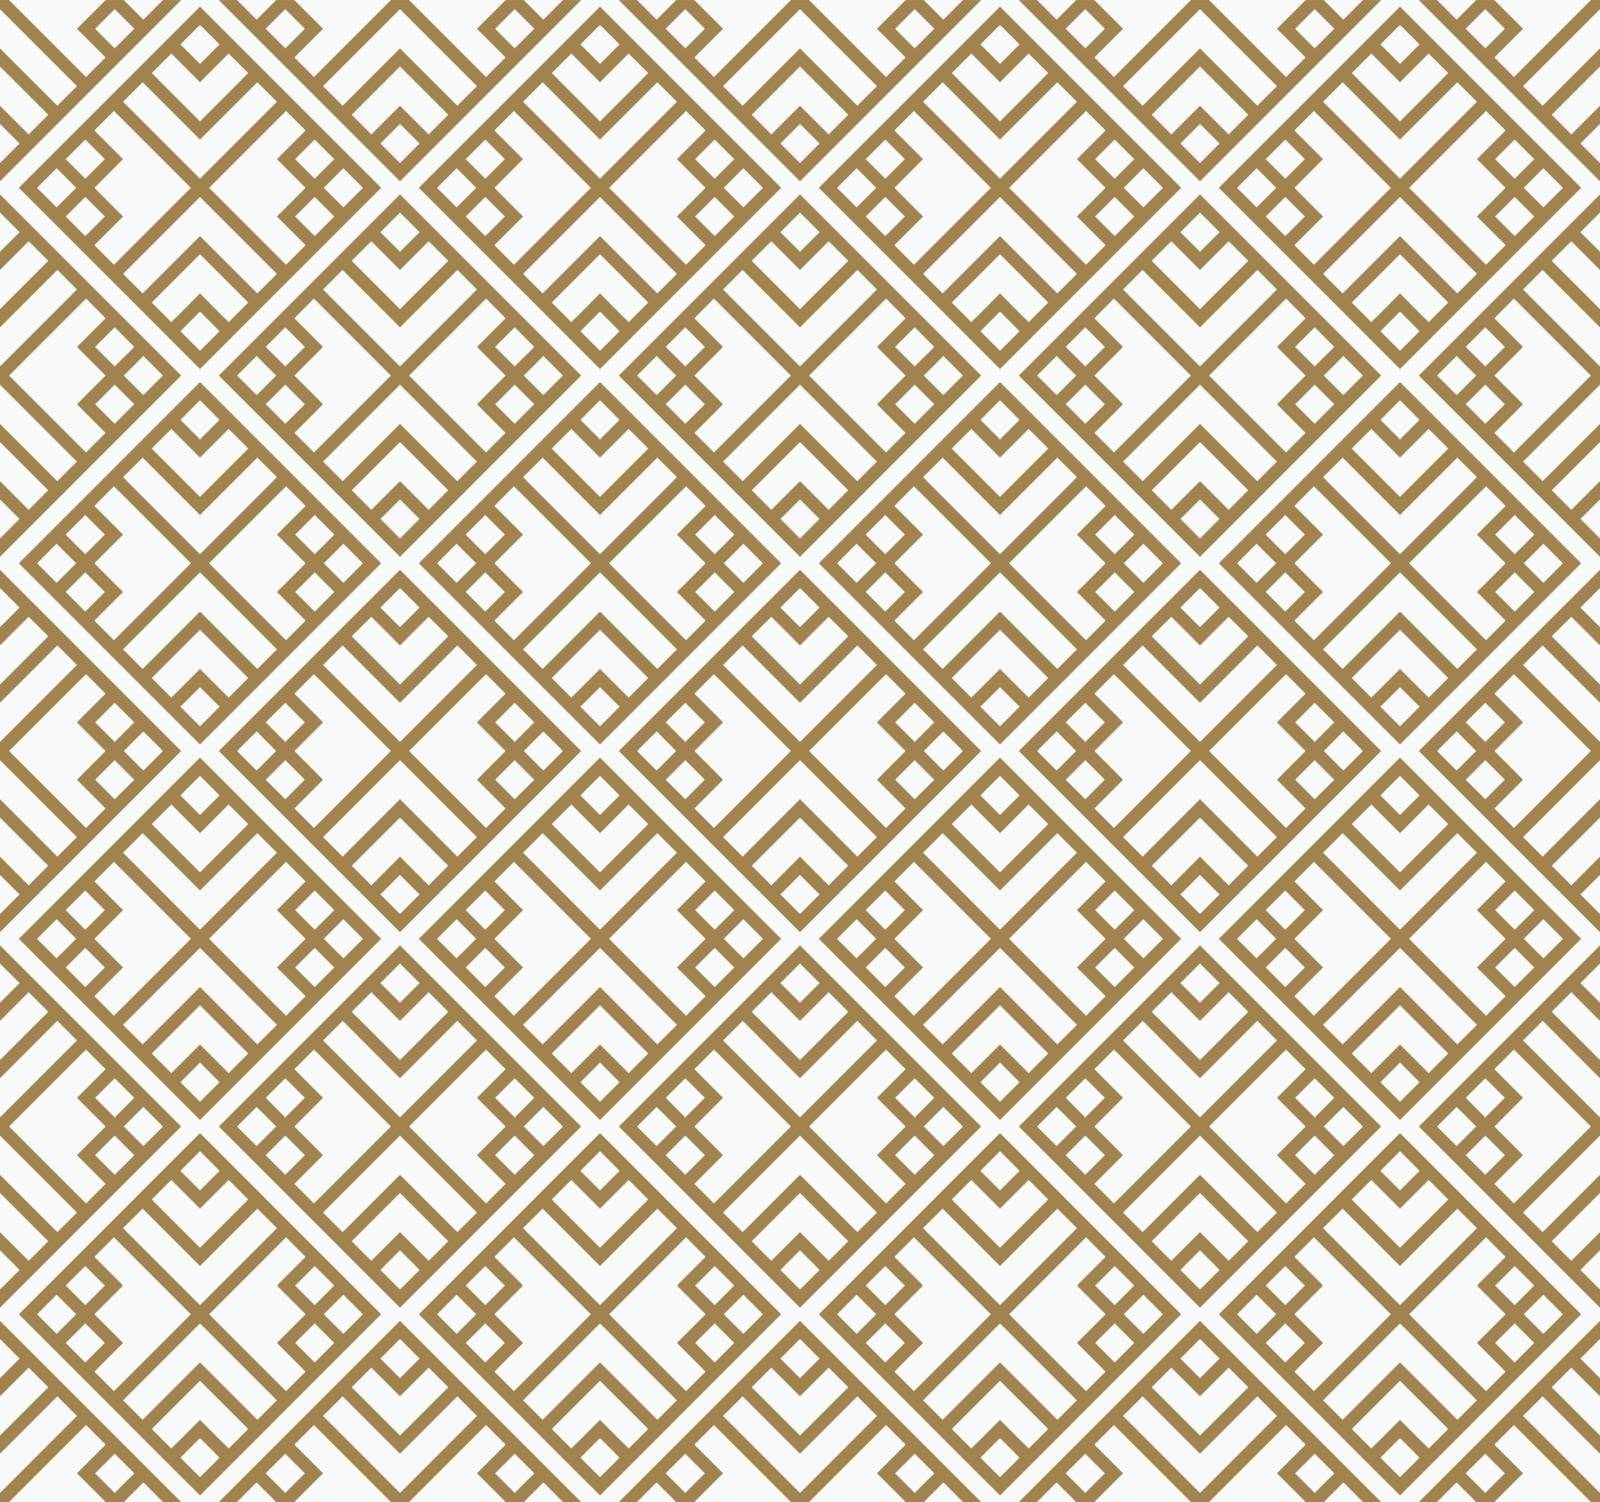 Modern Luxury stylish geometric textures with lines seamless patterns